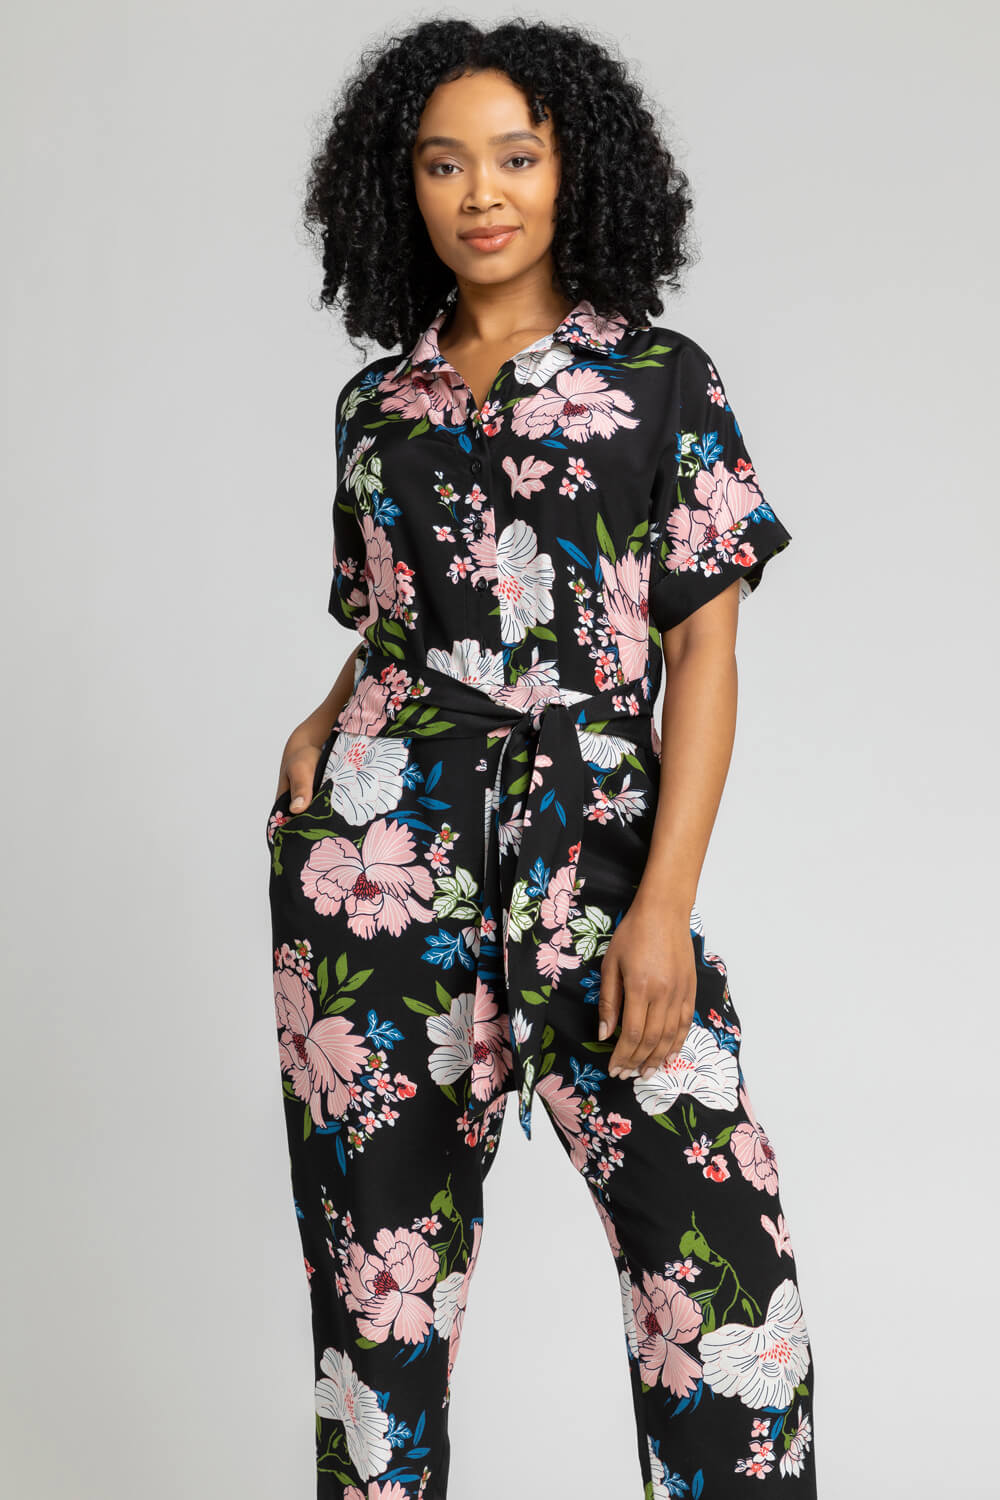 Multi Printed Jumpsuit by ROCOCO SAND for $40 | Rent the Runway